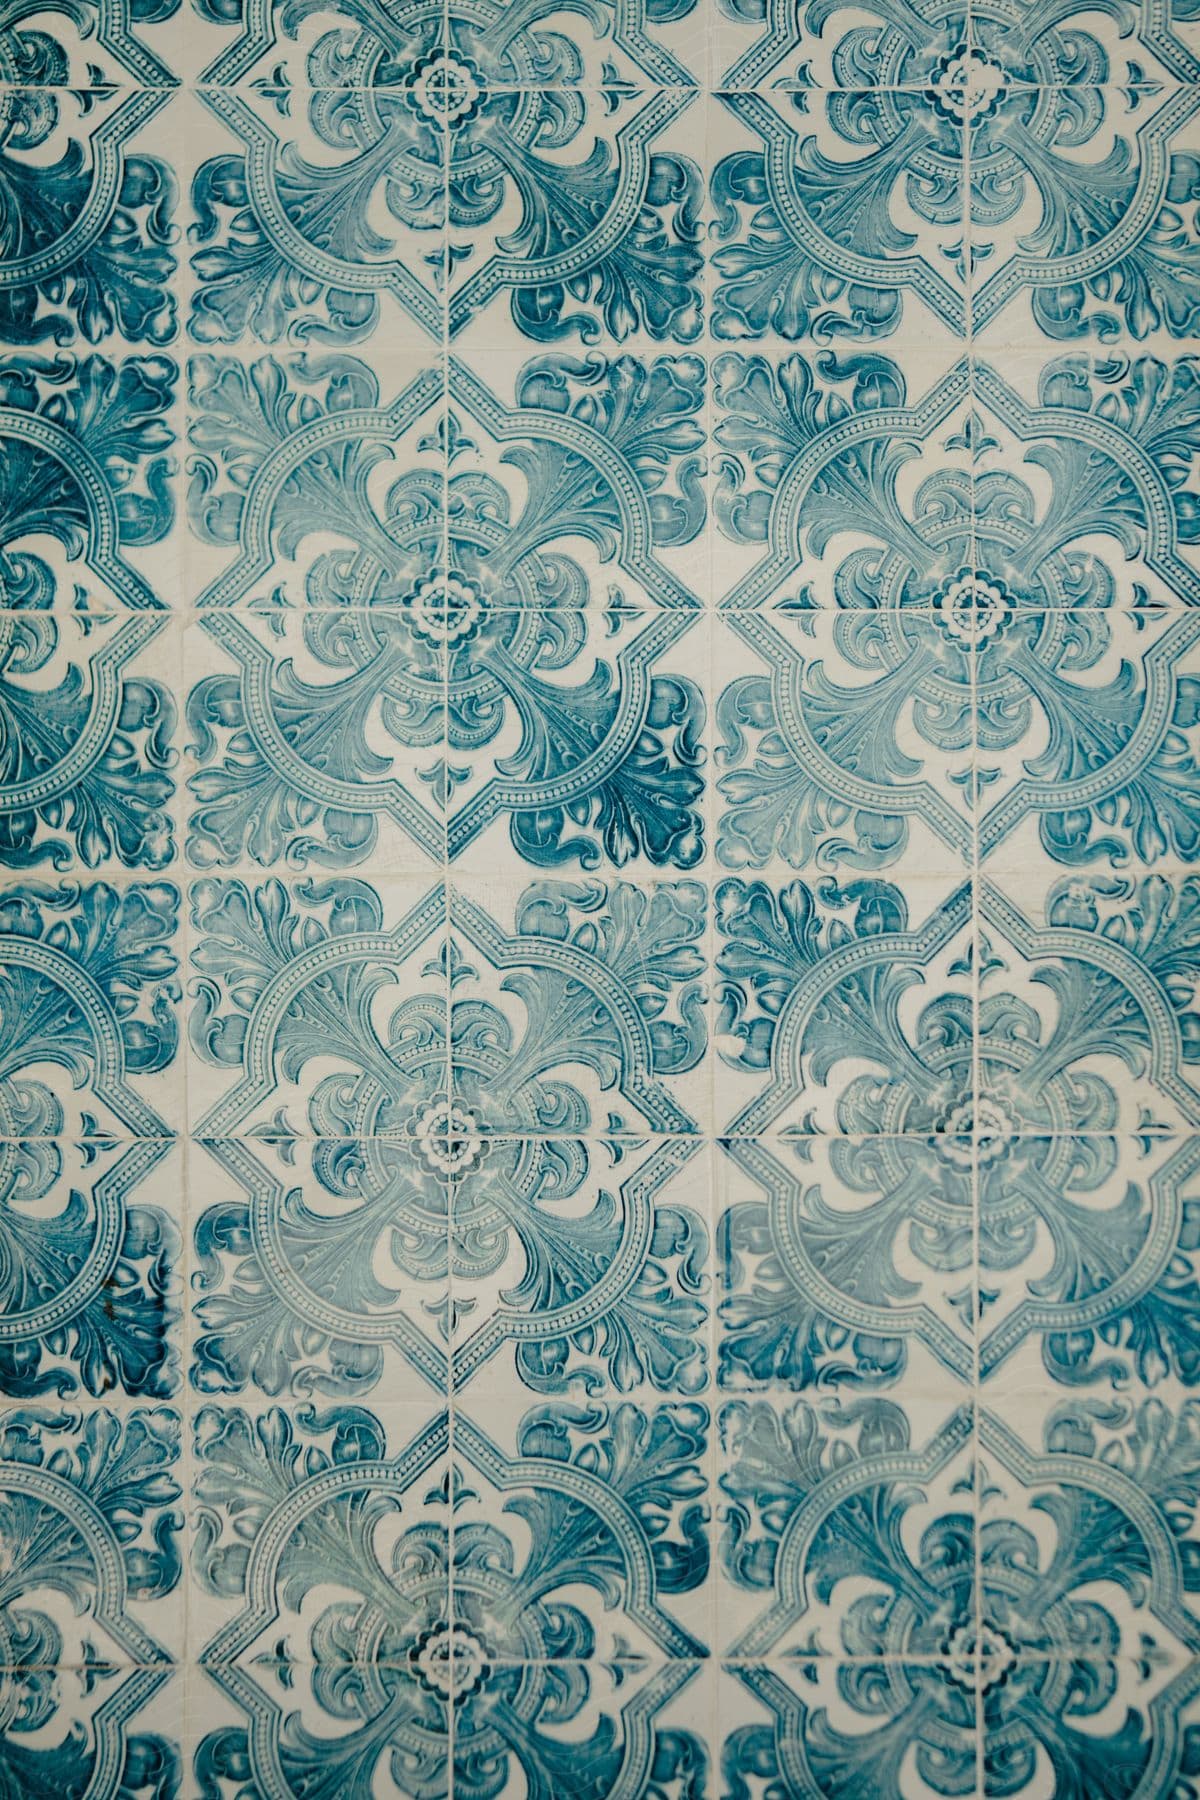 A tiled wall in white with blue designs